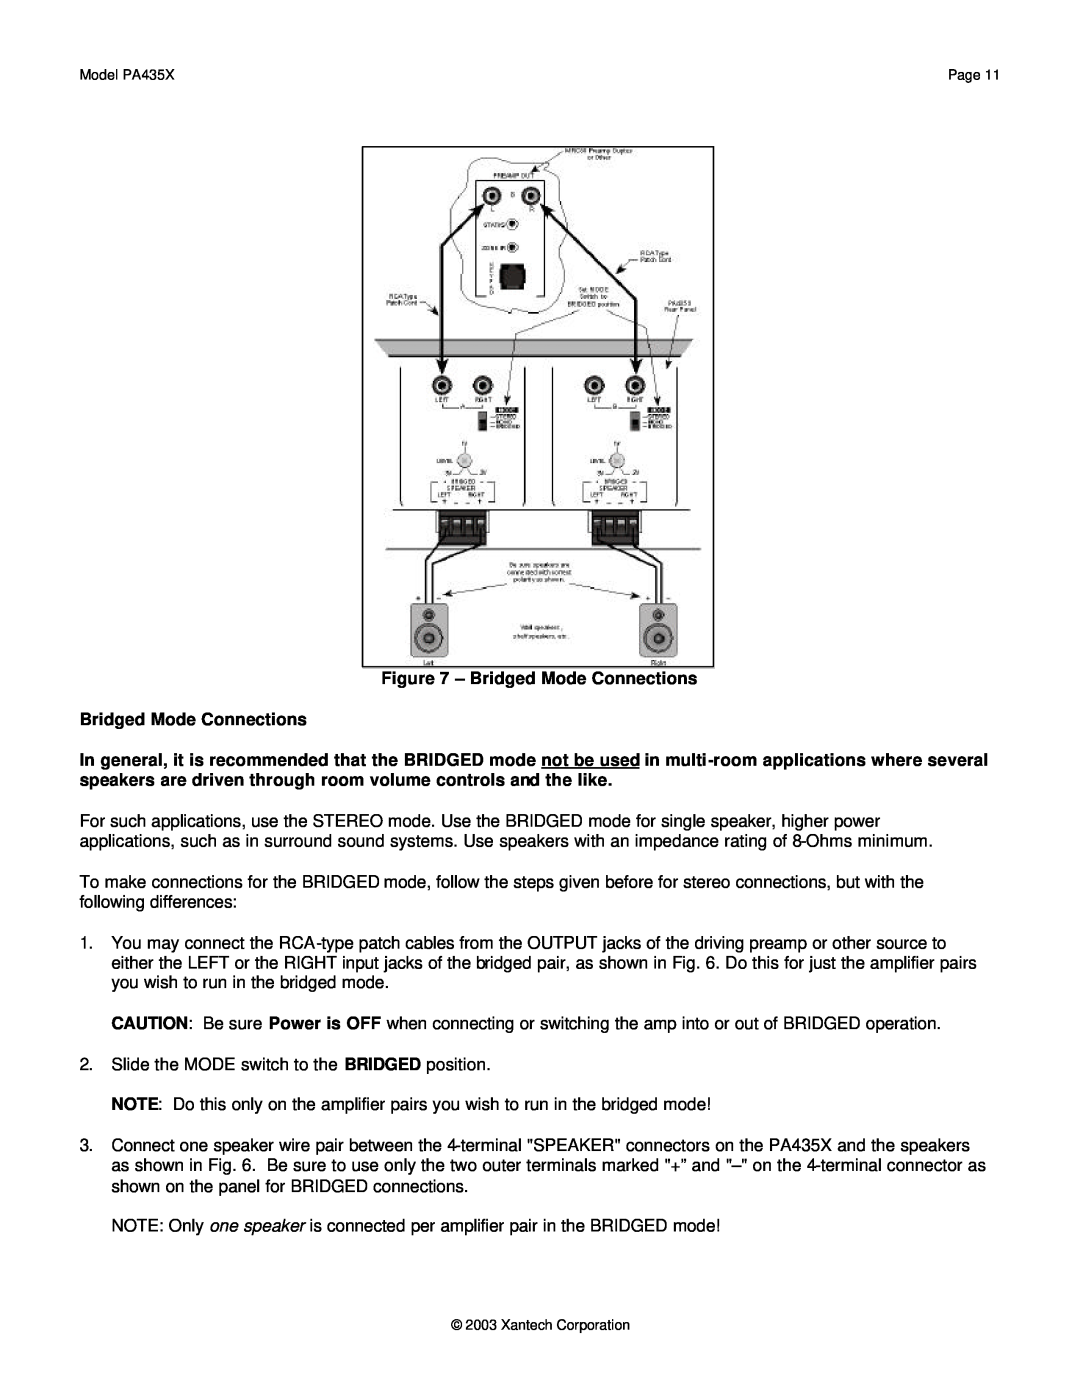 Xantech PA435X installation instructions Bridged Mode Connections 